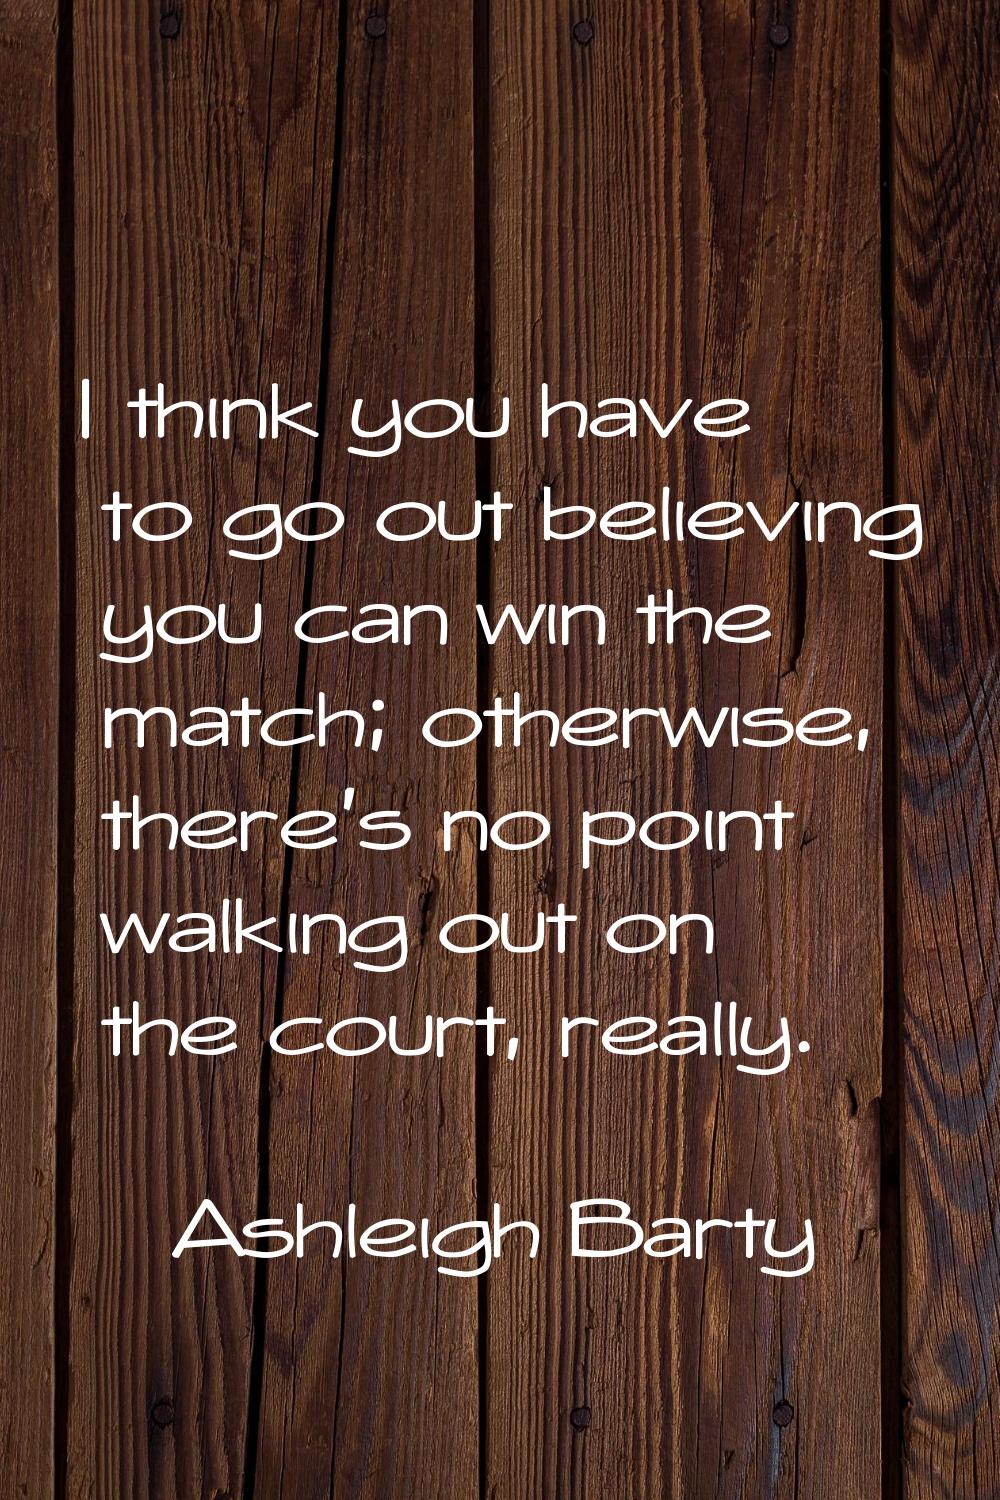 I think you have to go out believing you can win the match; otherwise, there's no point walking out